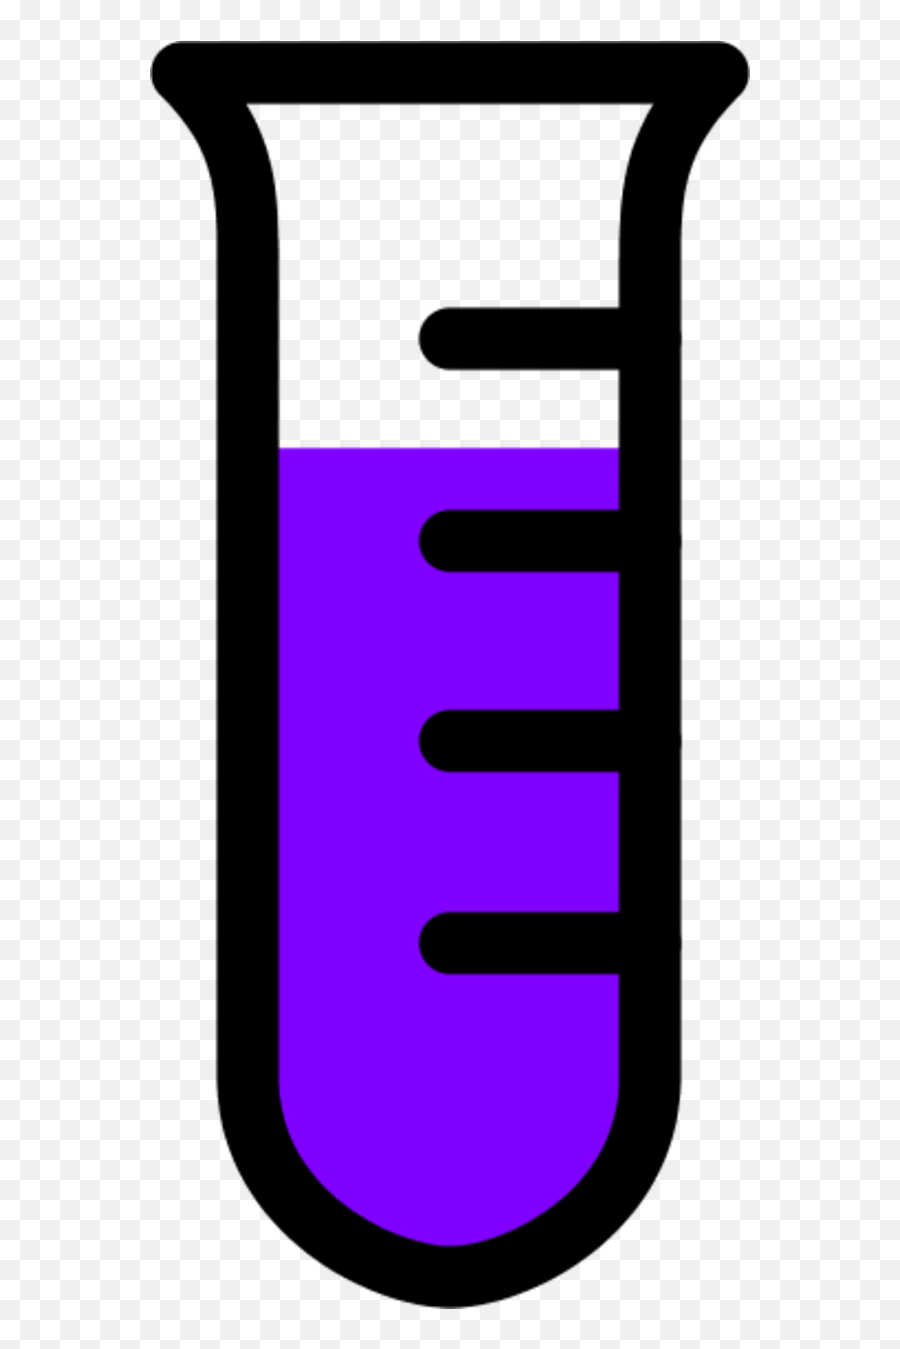 Free Test Tube Pictures Download Free Clip Art Free Clip - Test Tubes Clip Art Emoji,Test Tube Emoji